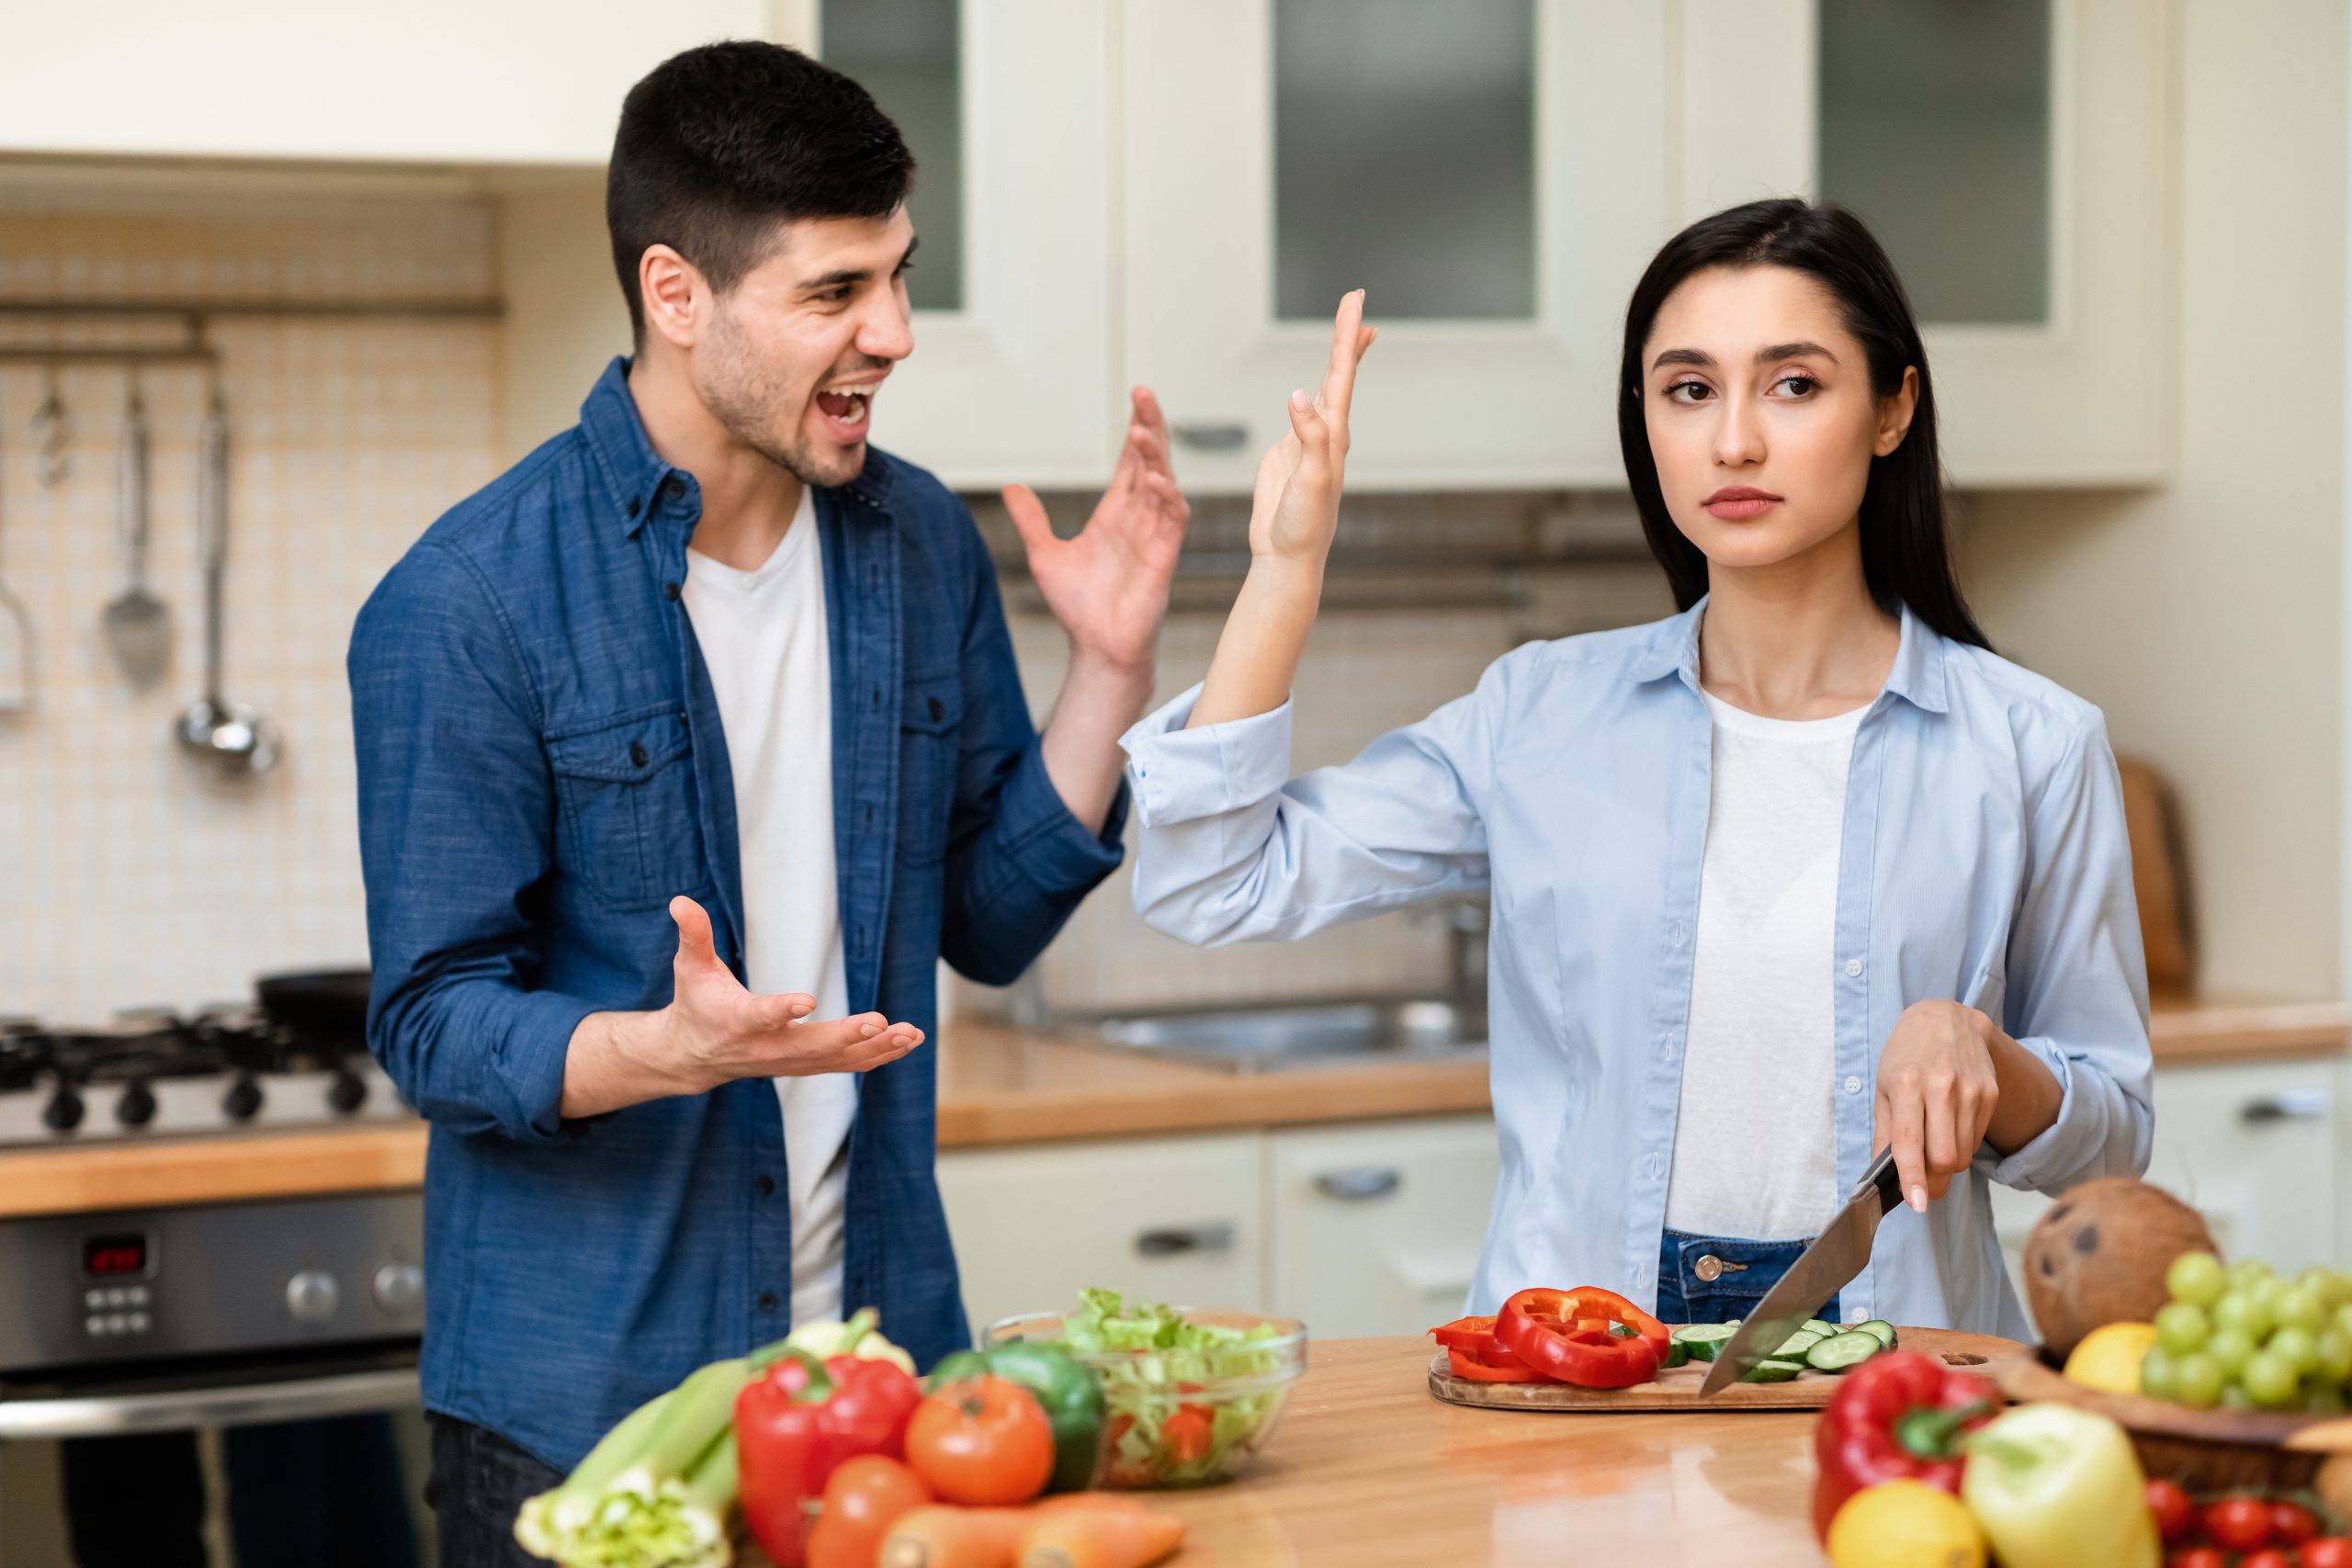 Young couple arguing in the kitchen, man screaming, woman stopping him, showing palm